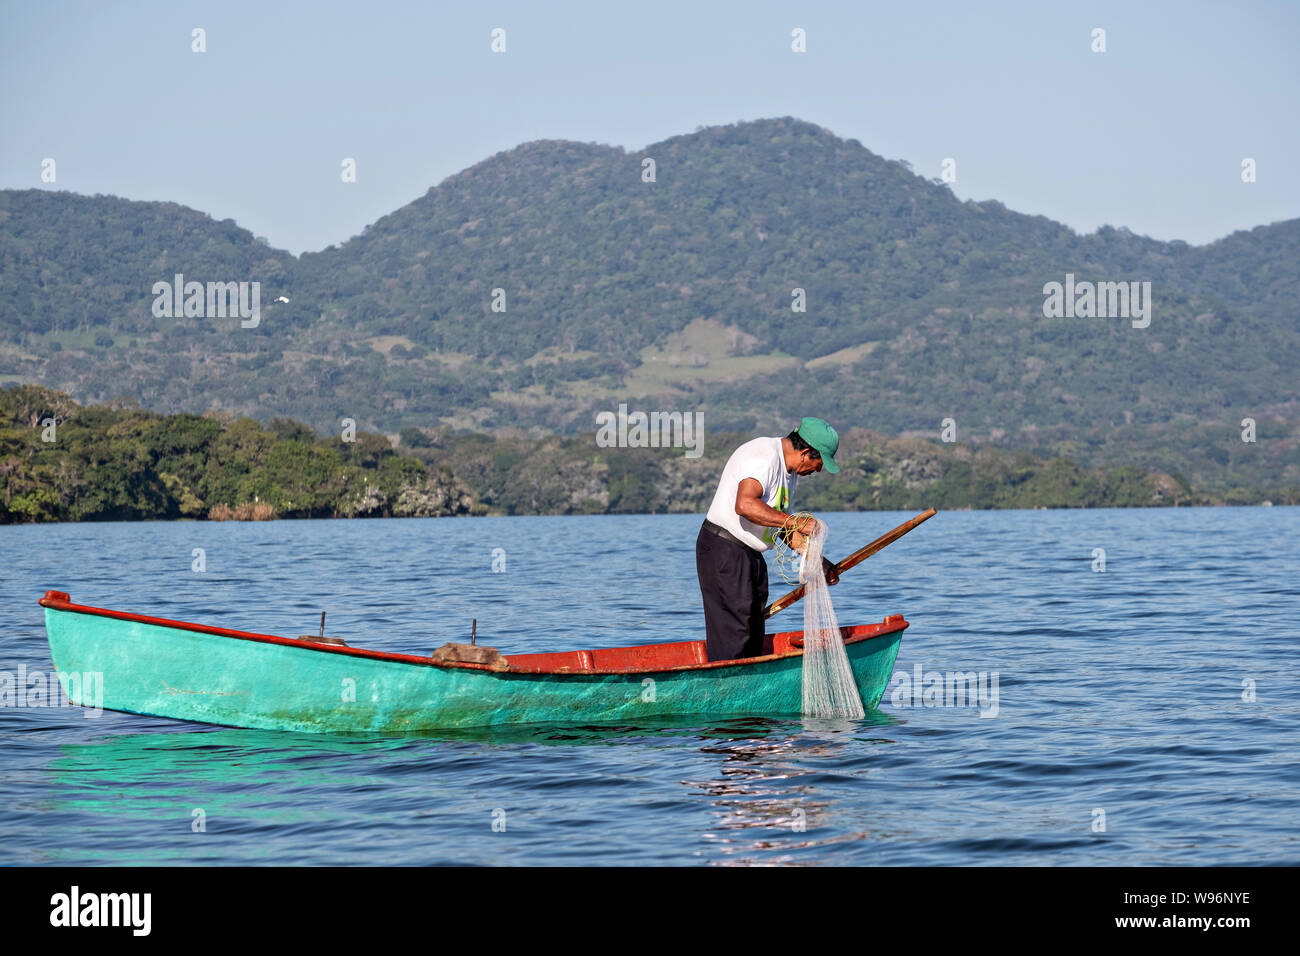 A fisherman prepares to cast a net into Lake Catemaco in Catemaco, Veracruz, Mexico. The tropical freshwater lake at the center of the Sierra de Los Tuxtlas, is a popular tourist destination and known for free ranging monkeys, the rainforest backdrop and Mexican witches known as Brujos. Stock Photo